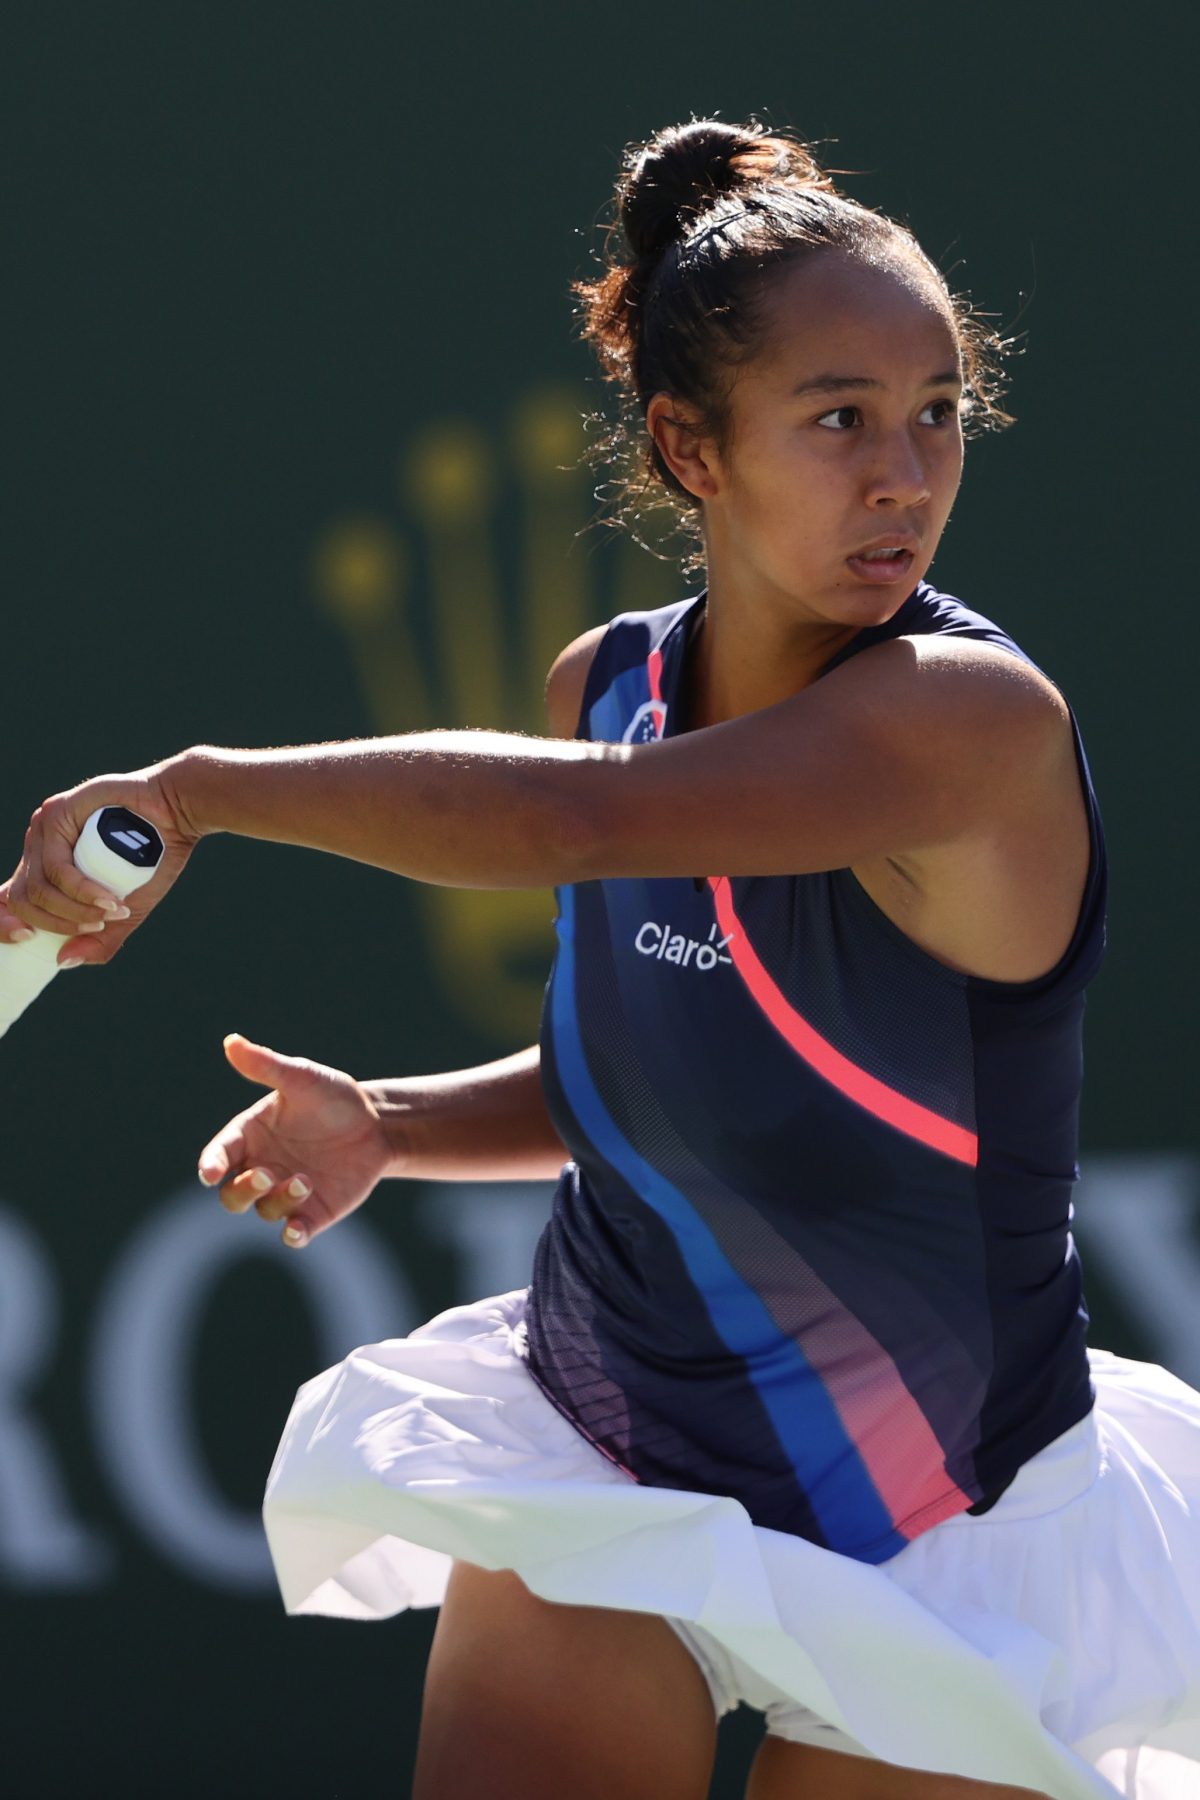 INDIAN WELLS, CALIFORNIA - OCTOBER 12: Leylah Fernandez of Canada plays a forehand against Shelby Rogers of the United States during fourth round match on Day 9 of the BNP Paribas Open at the Indian Wells Tennis Garden on October 12, 2021 in Indian Wells, California.